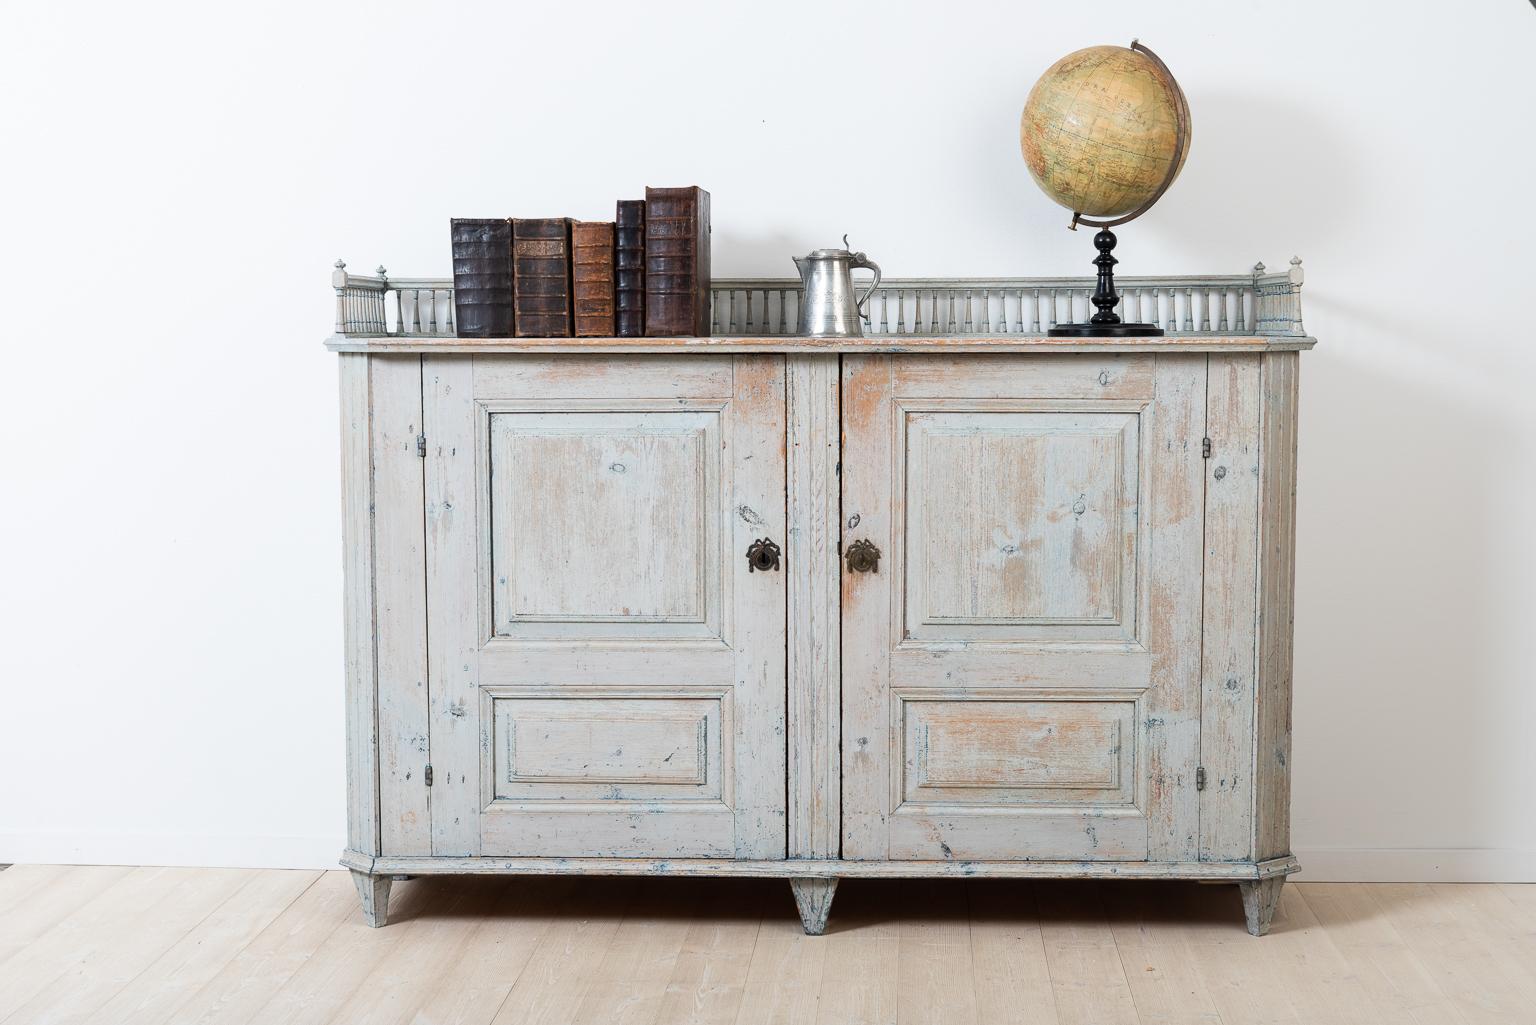 Swedish Gustavian sideboard scraped to the original blue / grey paint. The sideboard is decorated with an ornate balustrade. The lock and key are original and in fully functional condition. The interior has two drawers and two shelfs. The sideboard